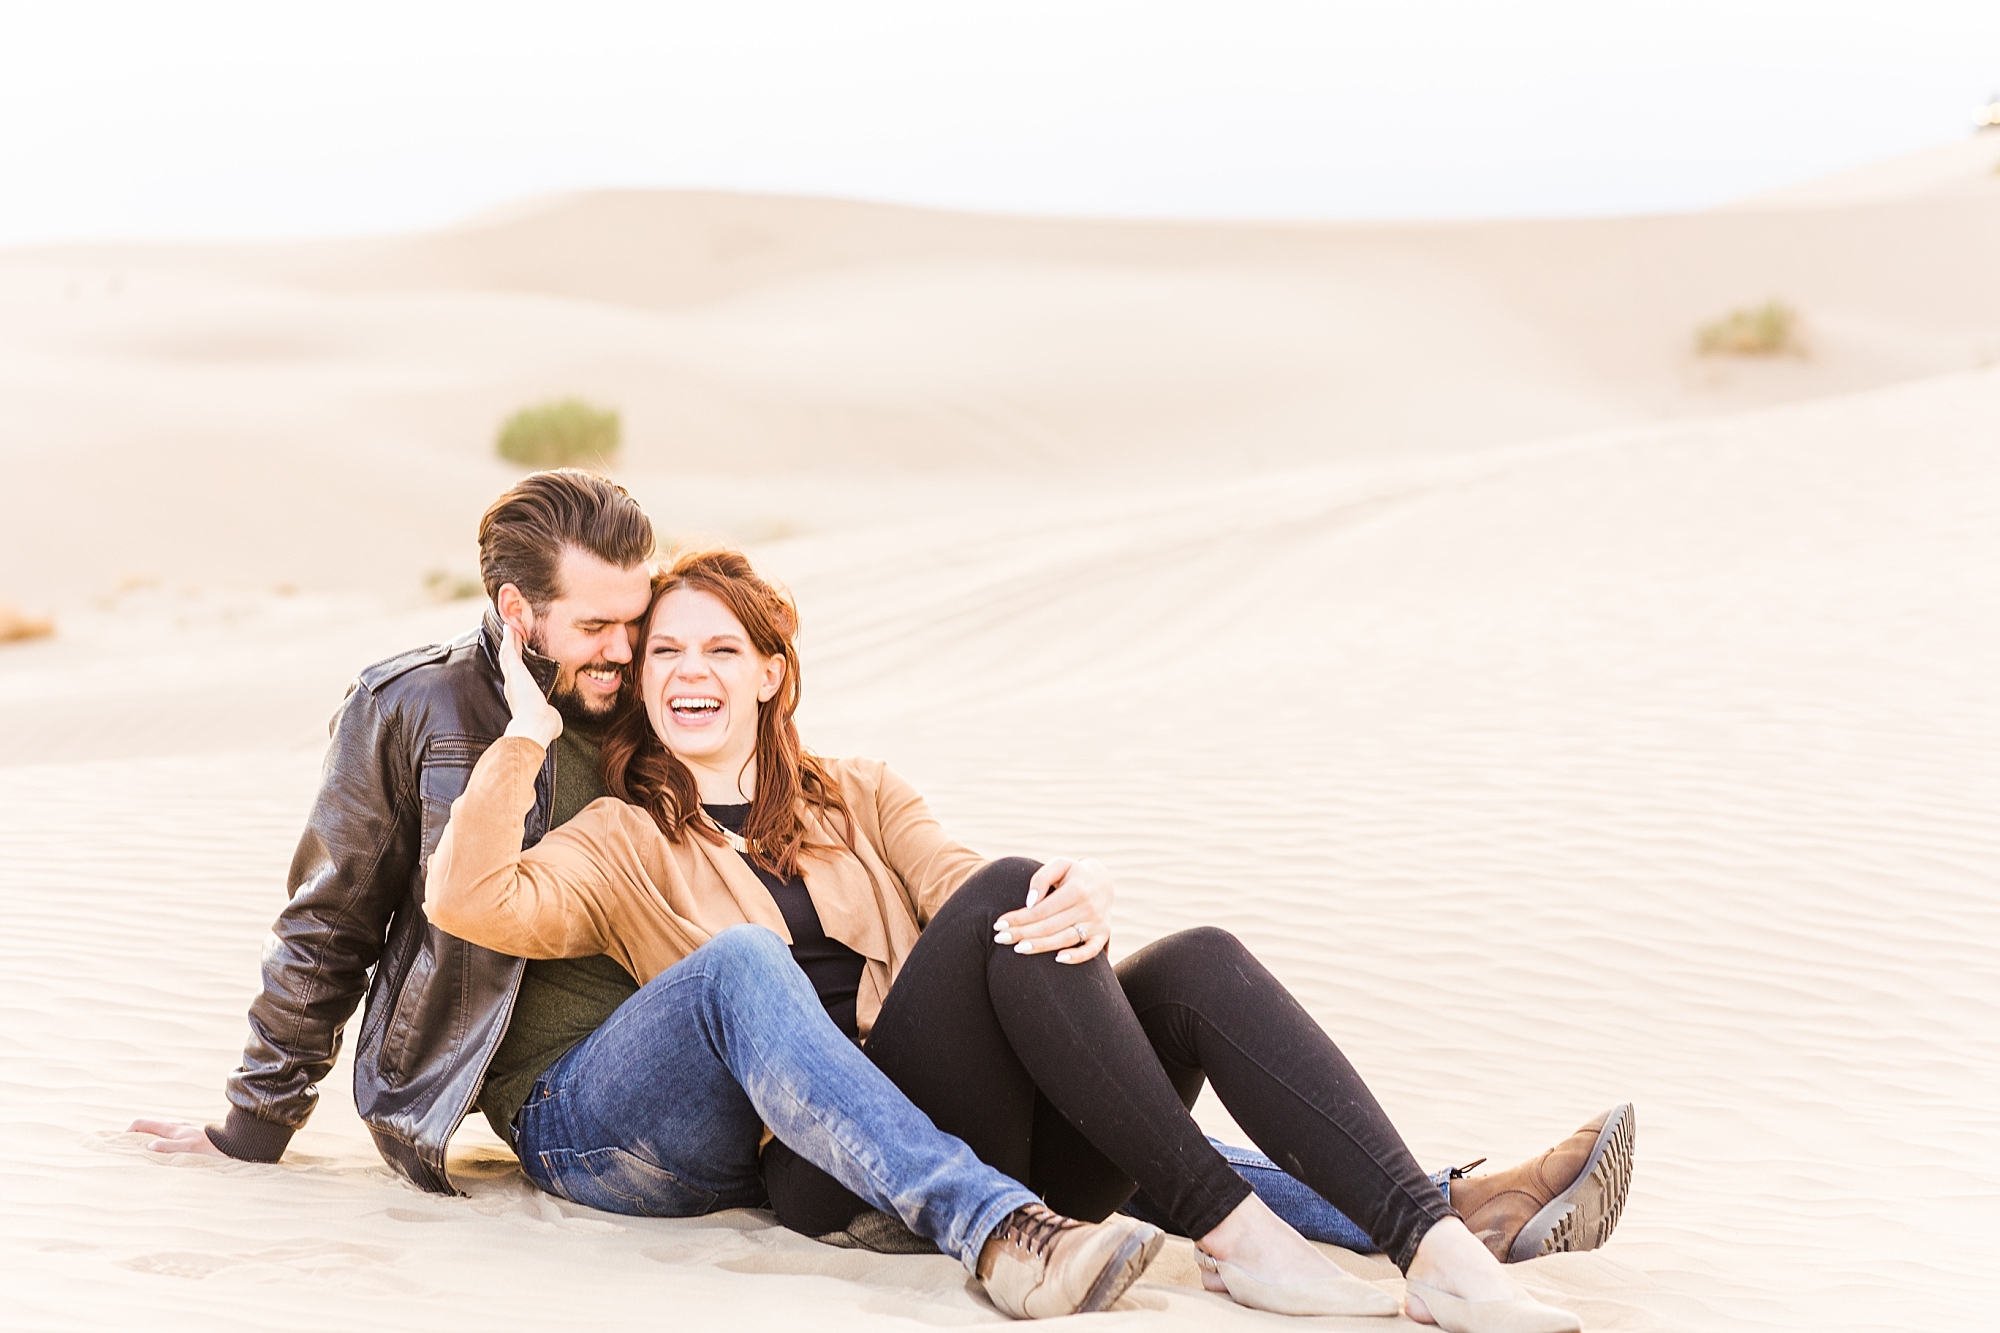 Contact Rachel Lindsey Photography for your photography session at the Sahara Desert!!